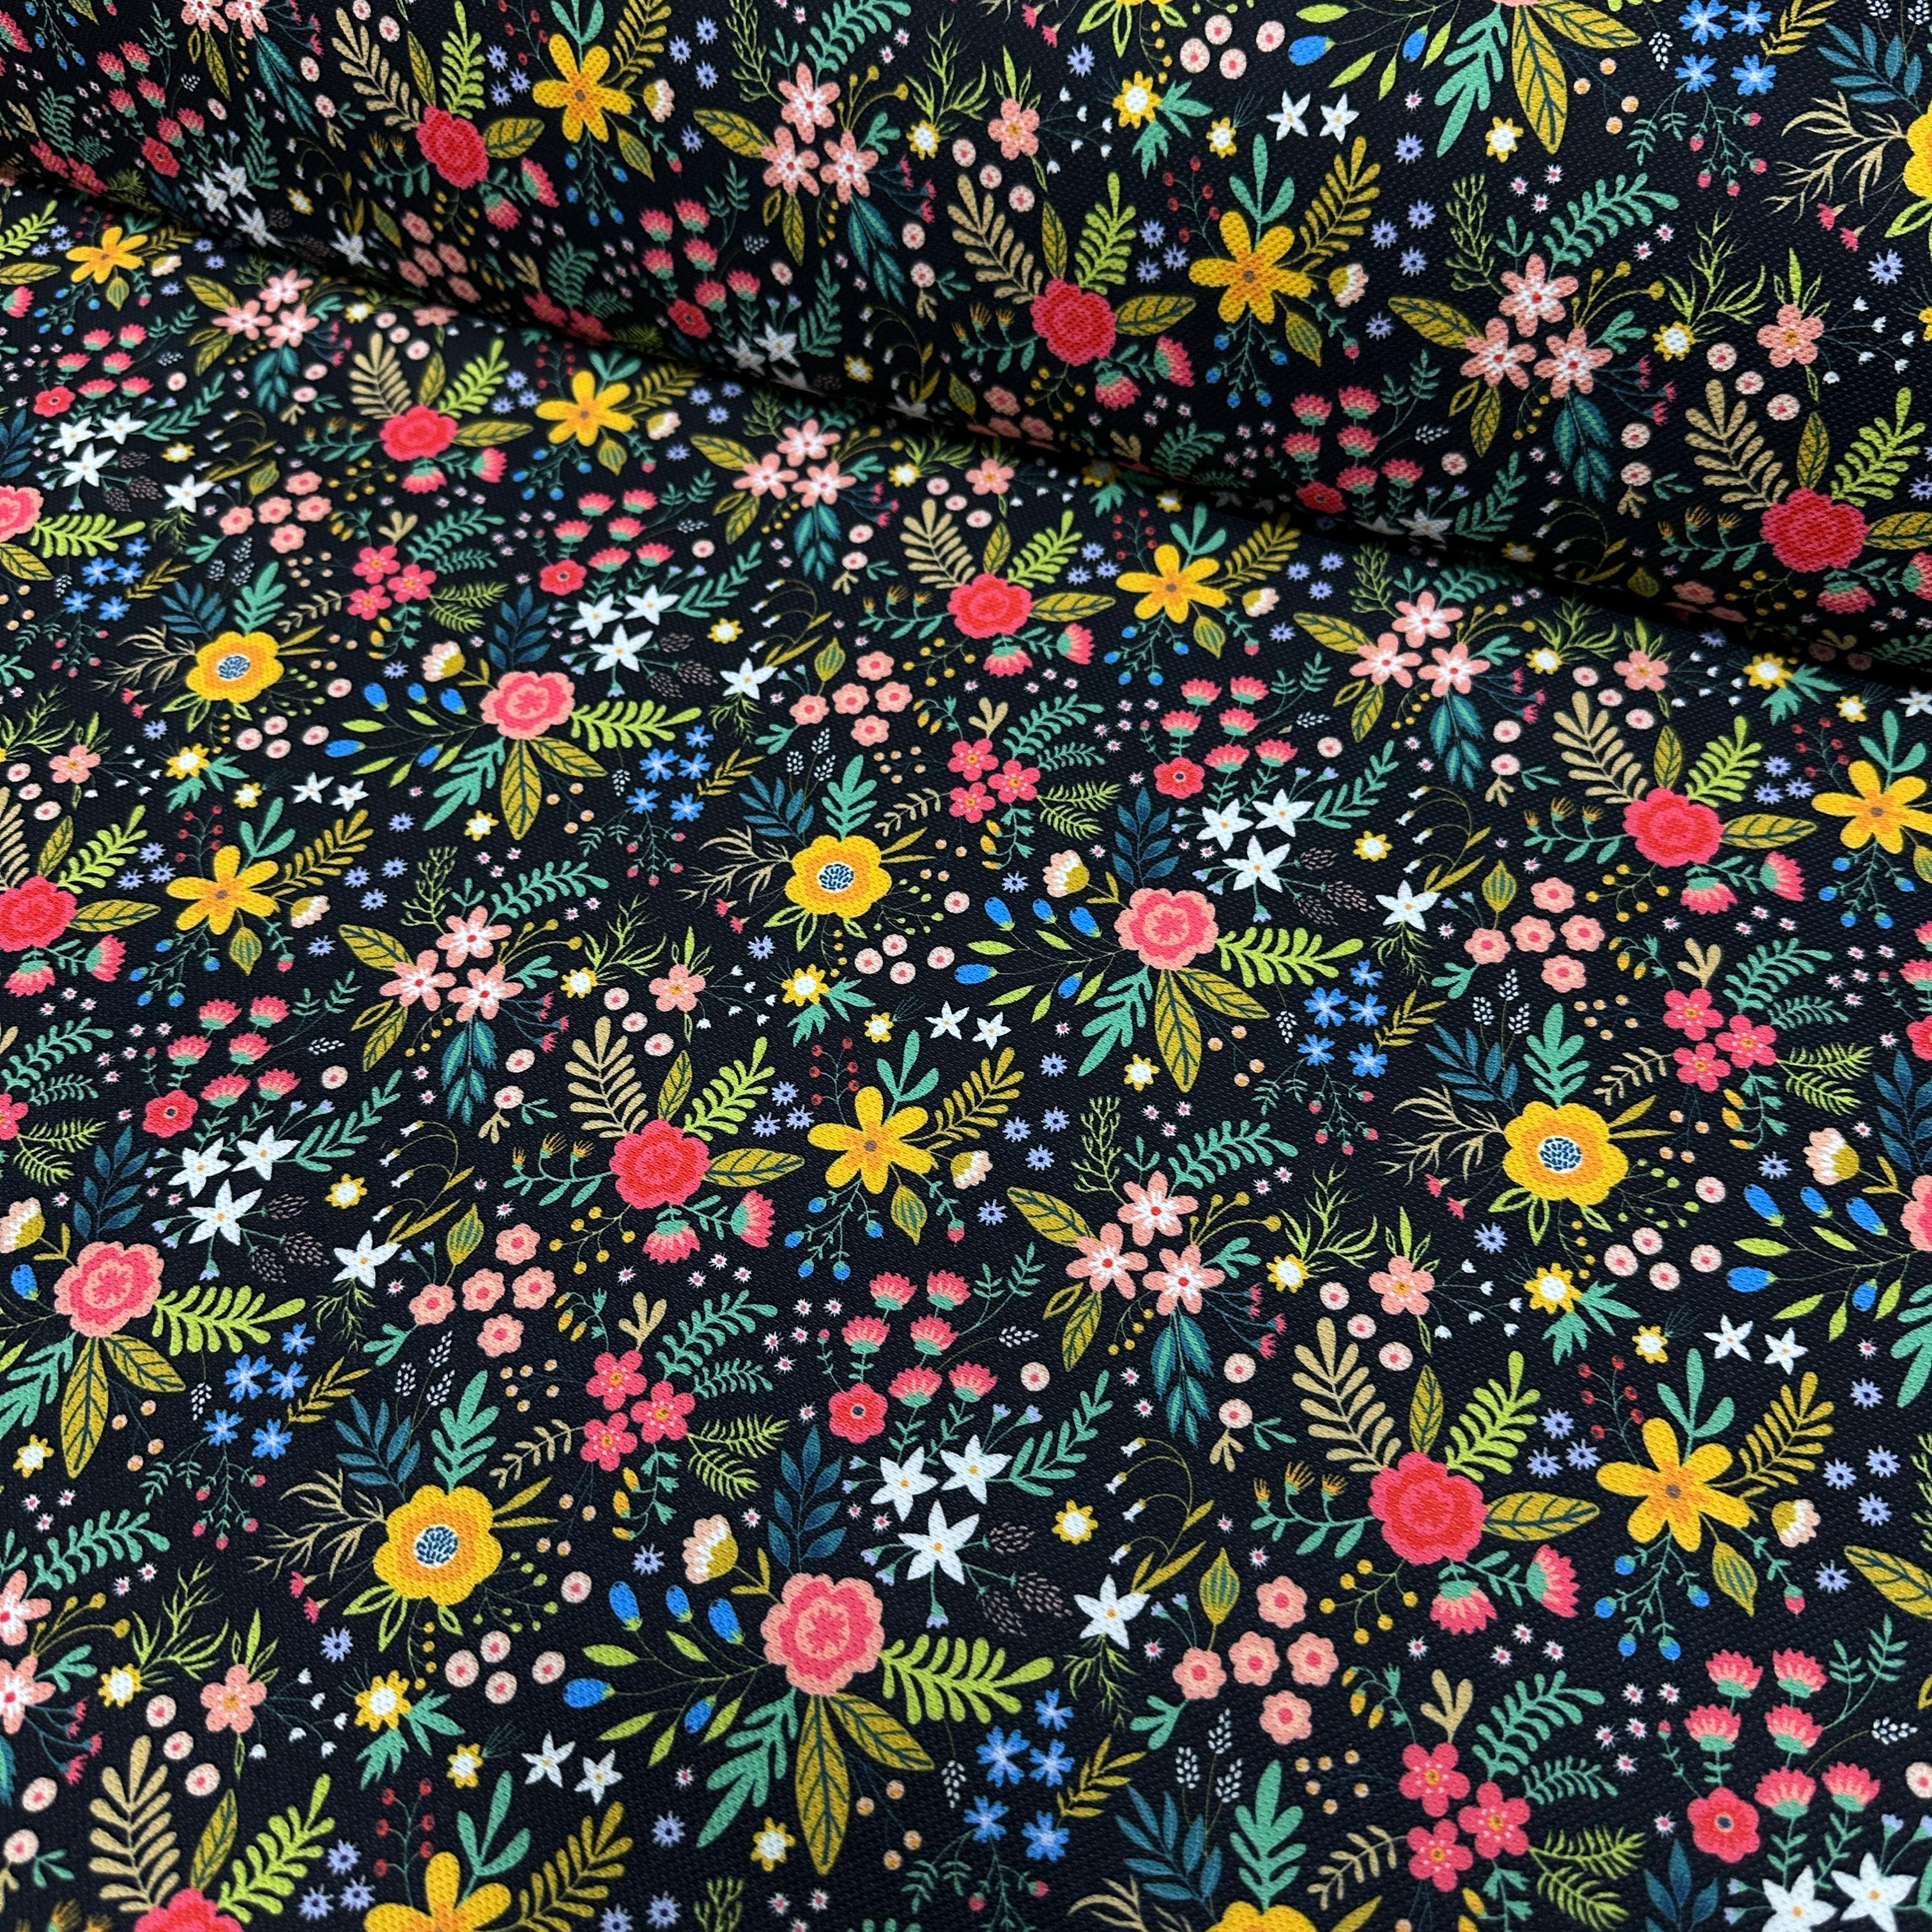 Colorful Flowers of the Night Digital Printing Fabric